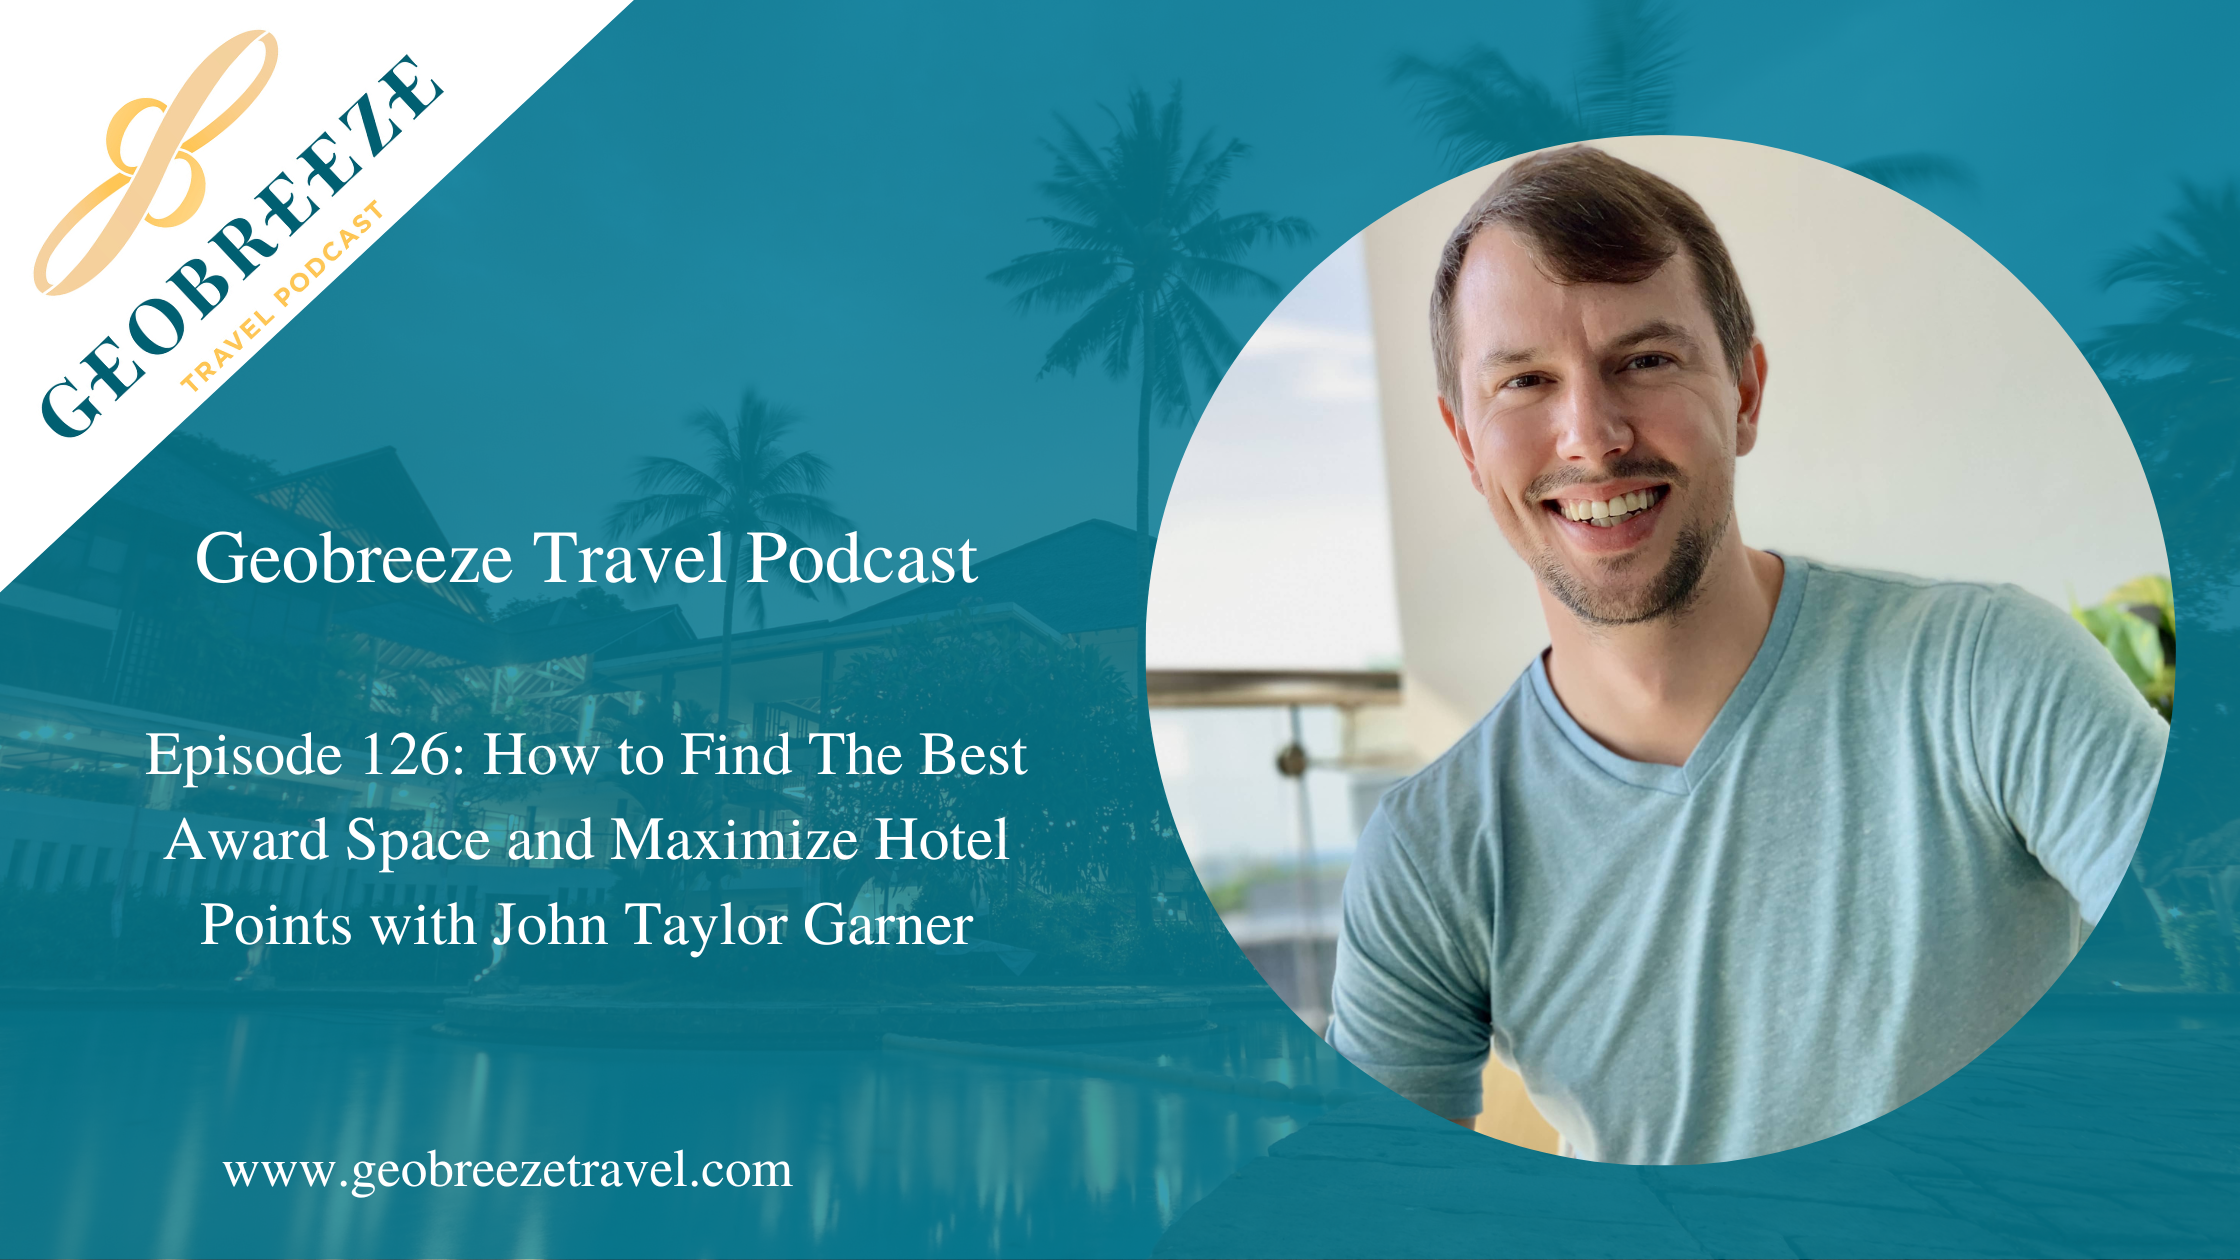 Episode 126: How to Find the Best Award Space and Maximize Hotel Points with John Taylor Garner